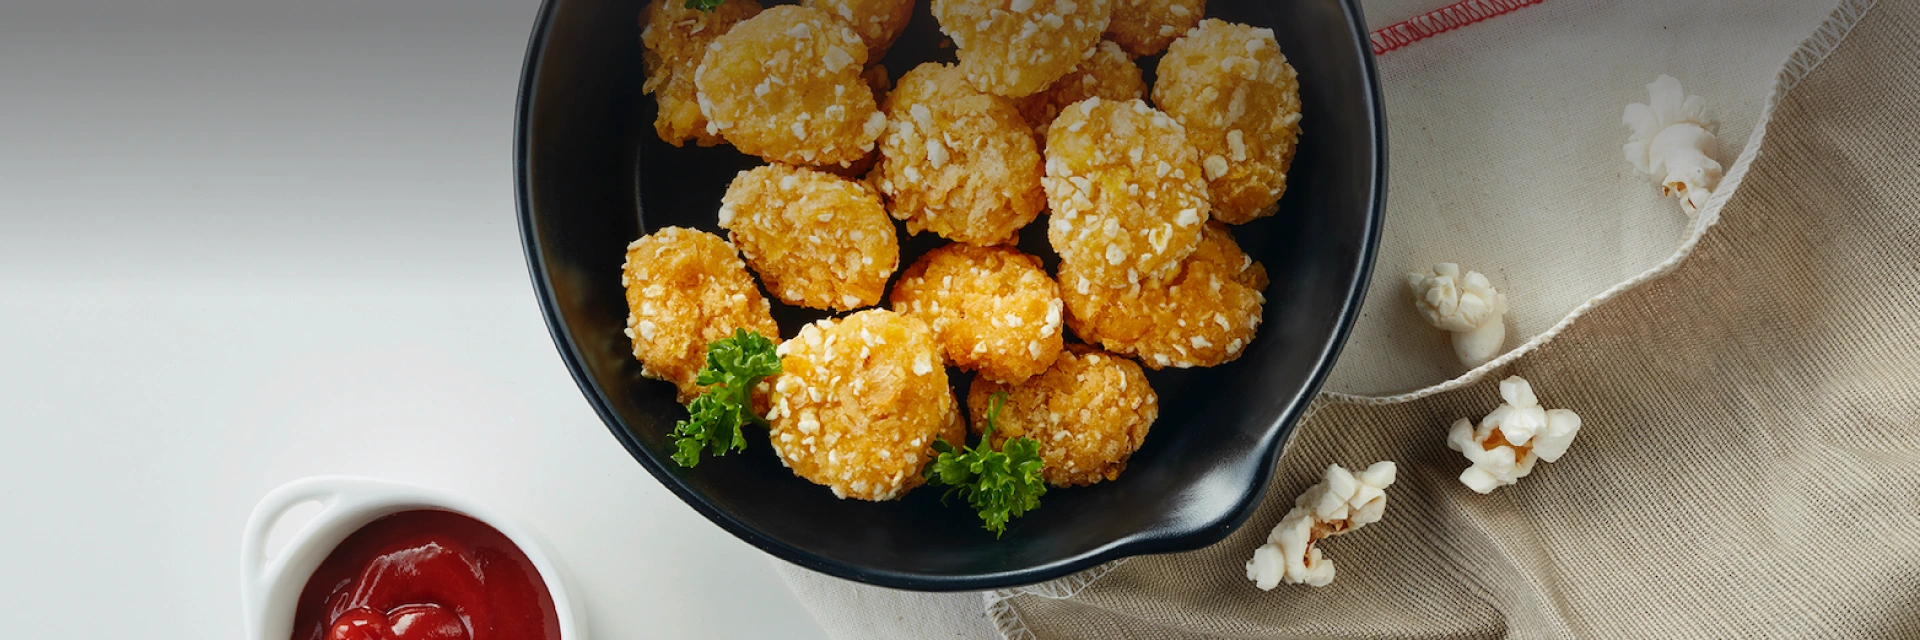 Popcorn Chicken made from plants, infused with real popcorn flakes. Easy to enjoy and healthier!